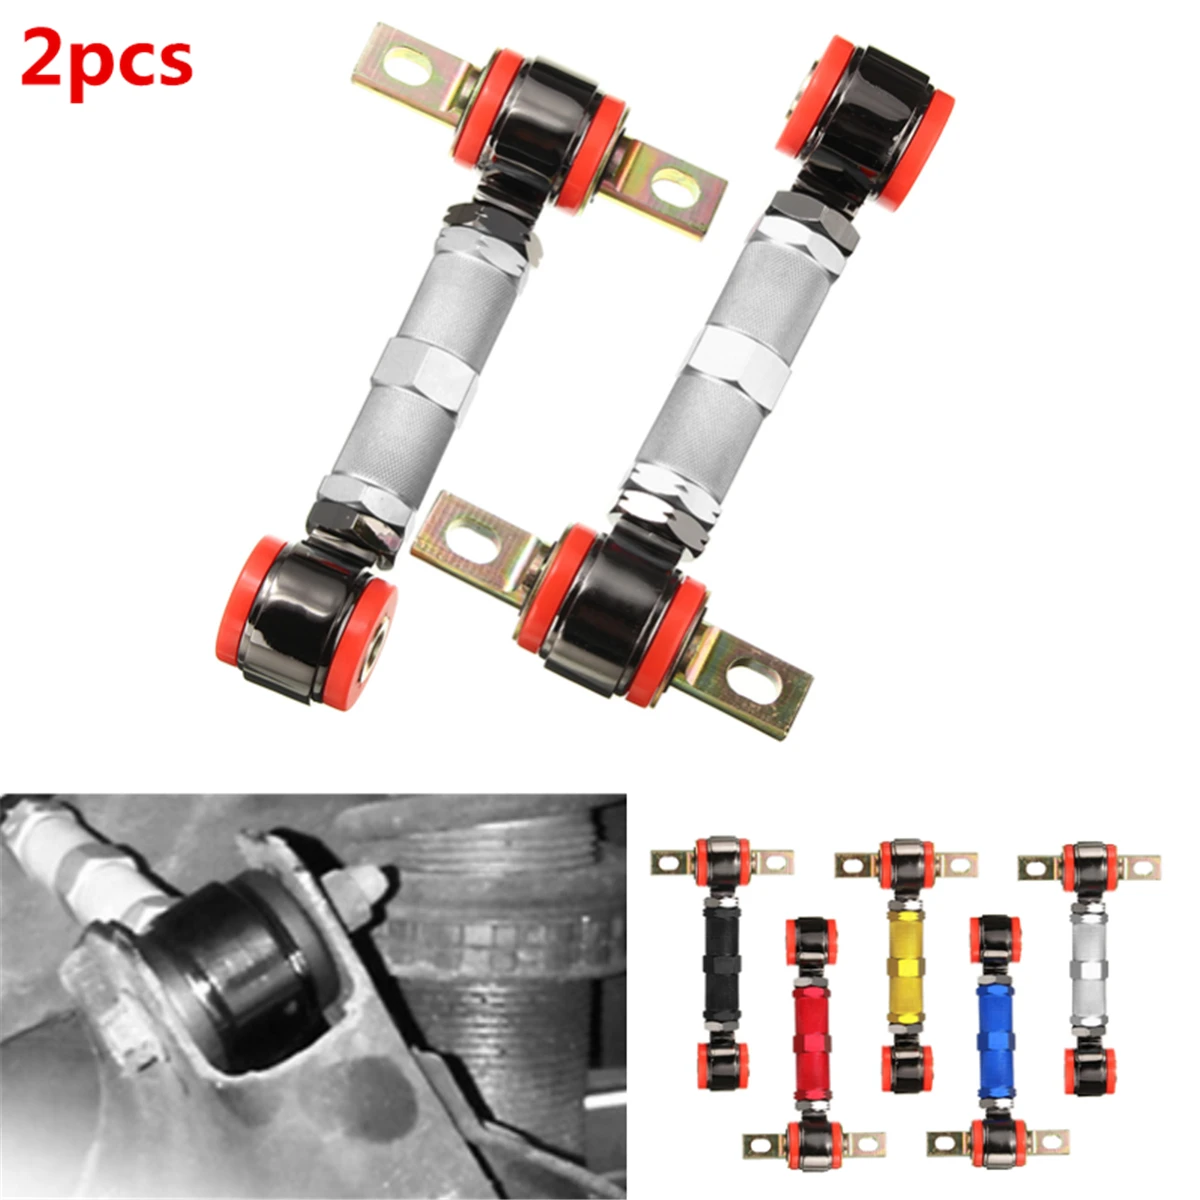 1pair Adjustable Racing Rear Suspension Camber Control Arms Kit for Honda for Civic 5color